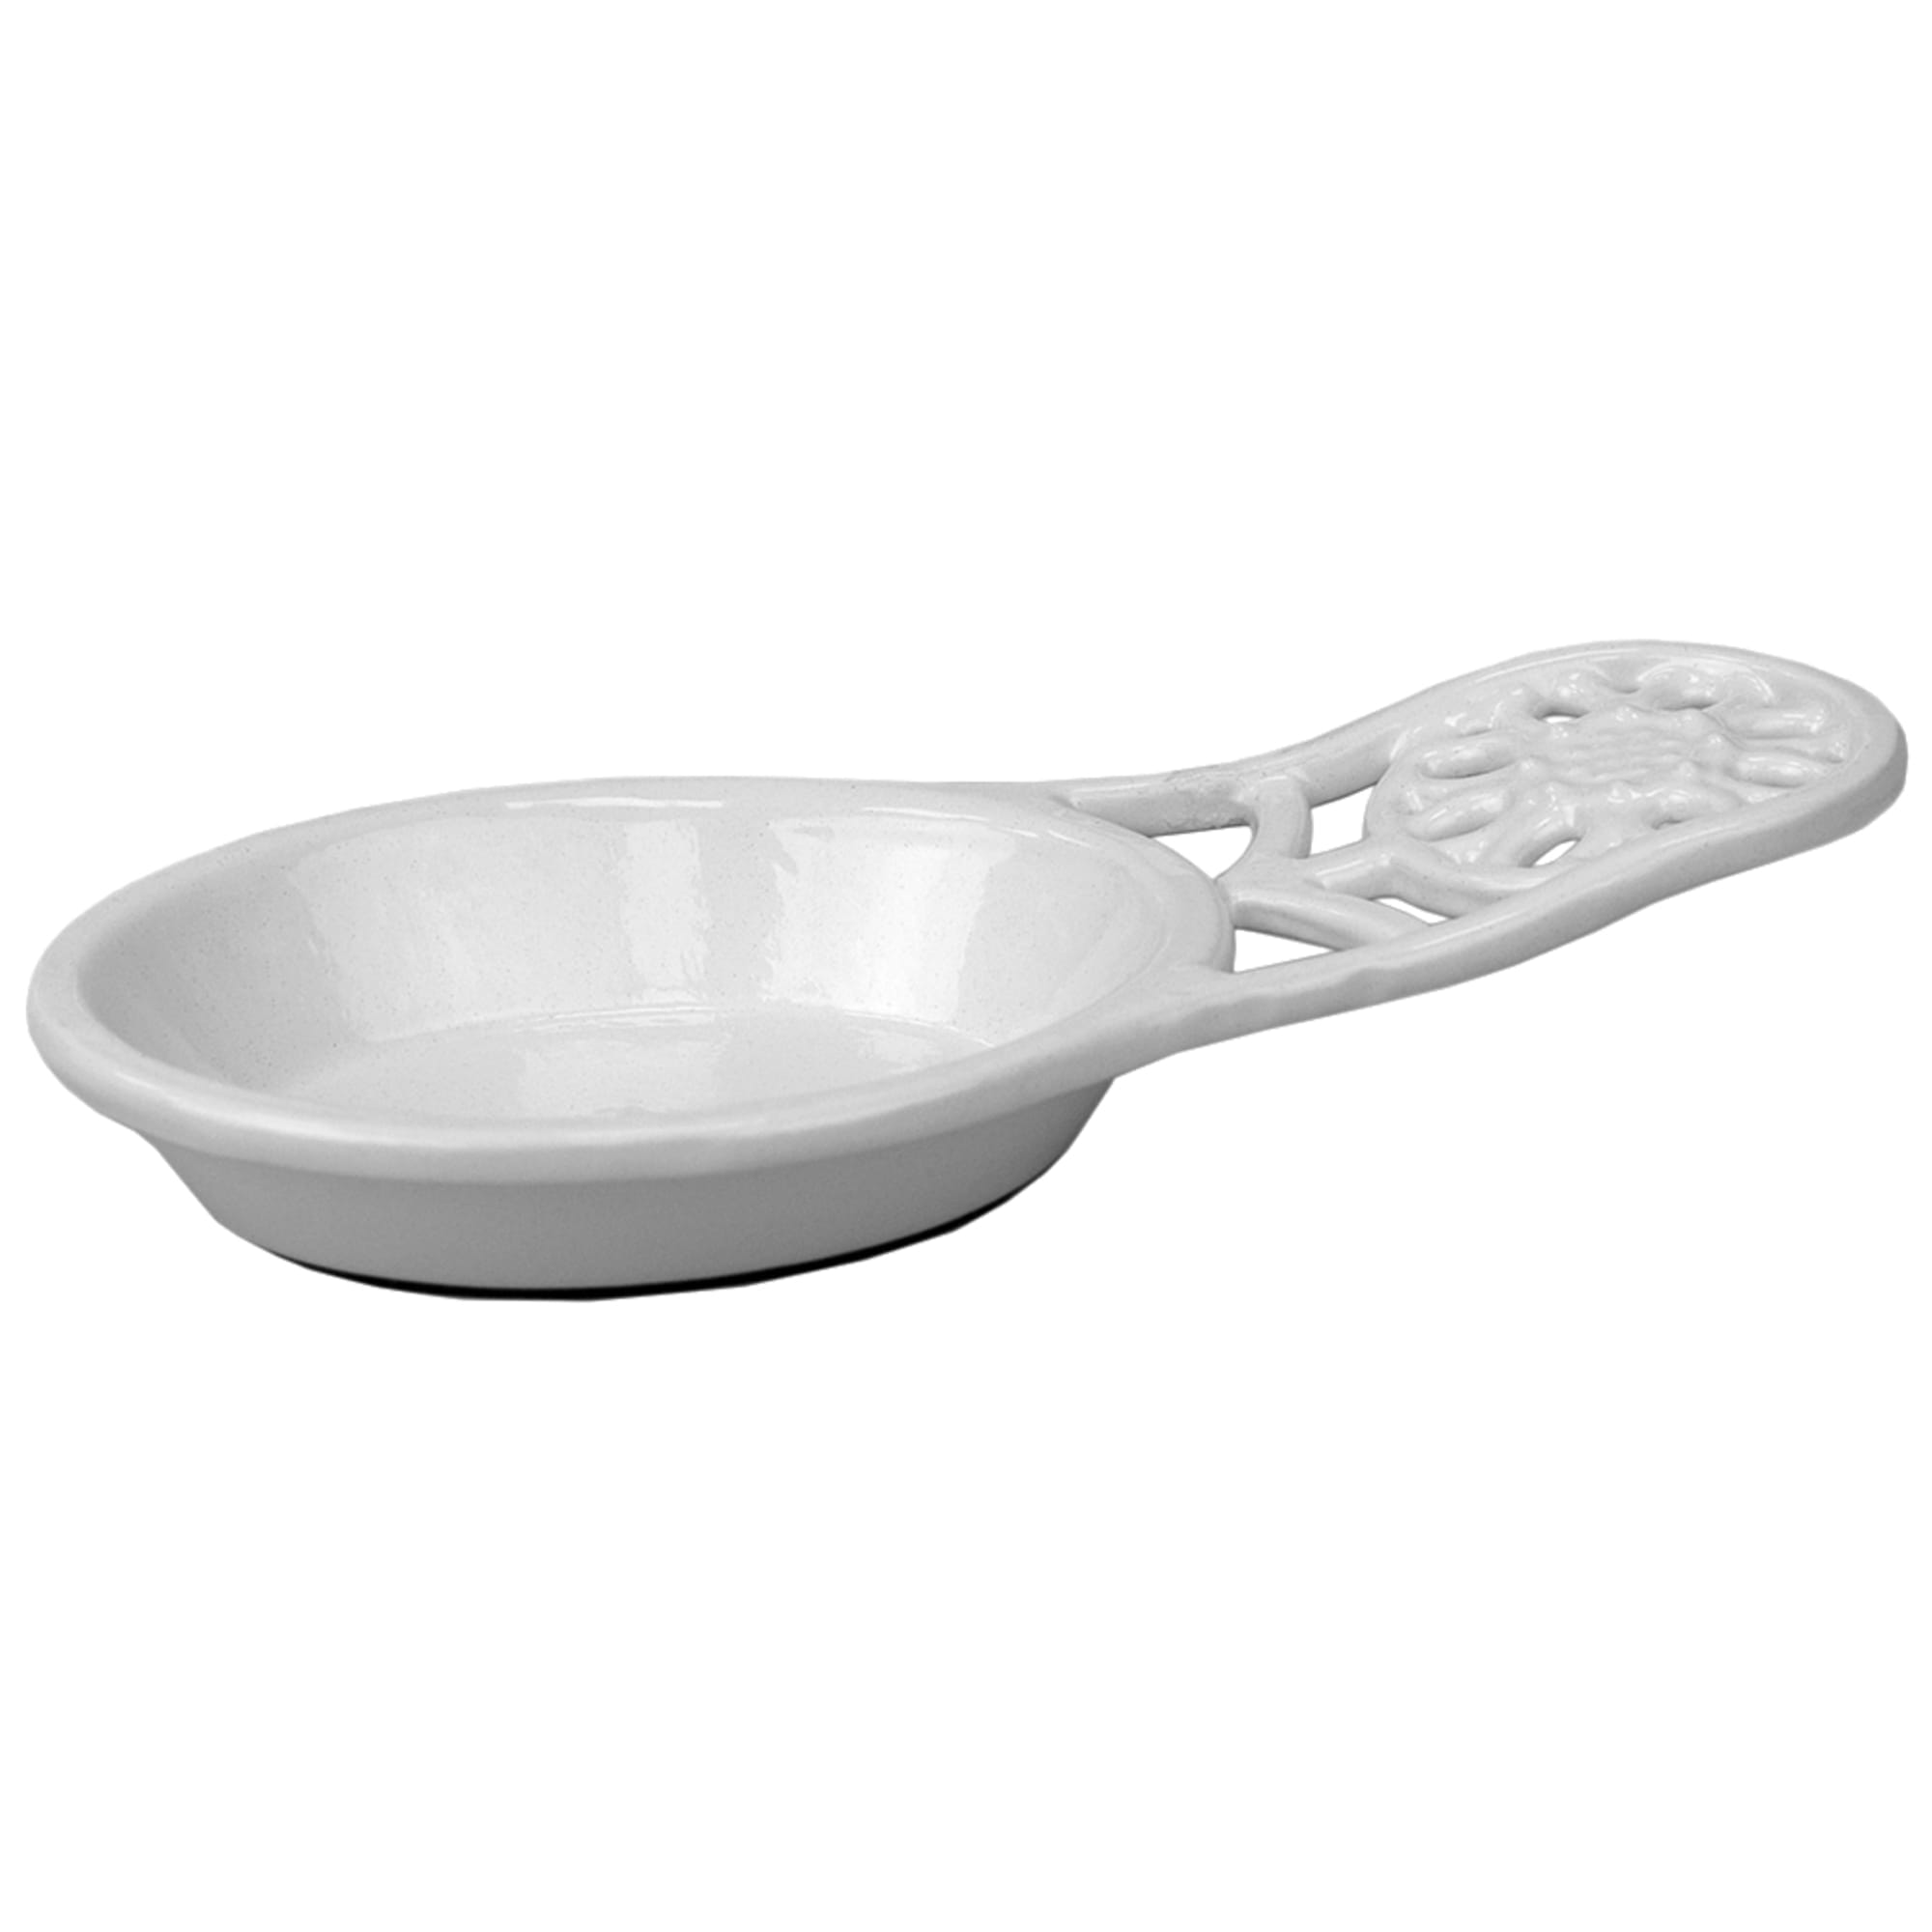 Home Basics Sunflower Heavy Weight Cast Iron Spoon Rest, White $4.00 EACH, CASE PACK OF 6